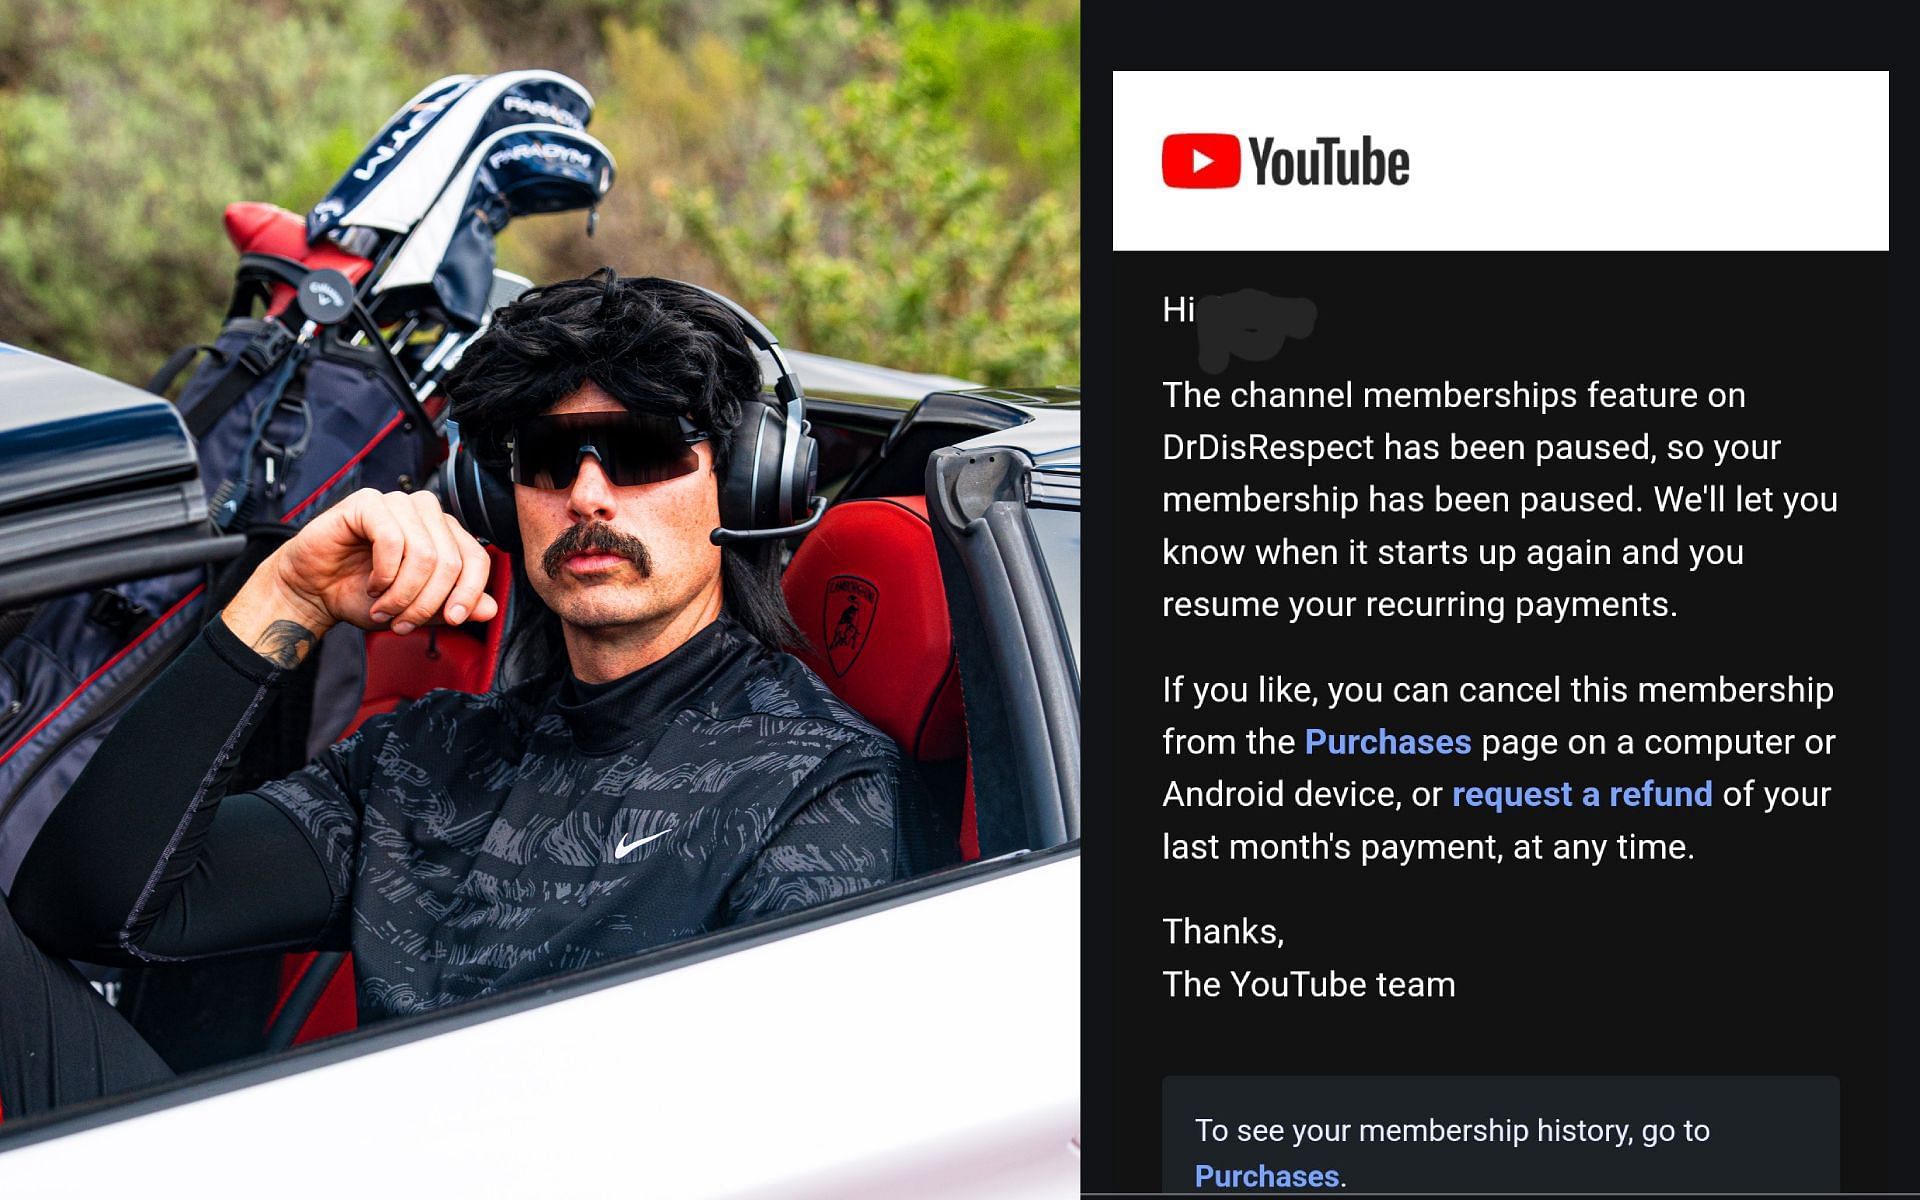 YouTube pauses paid membership for Dr DisRespect